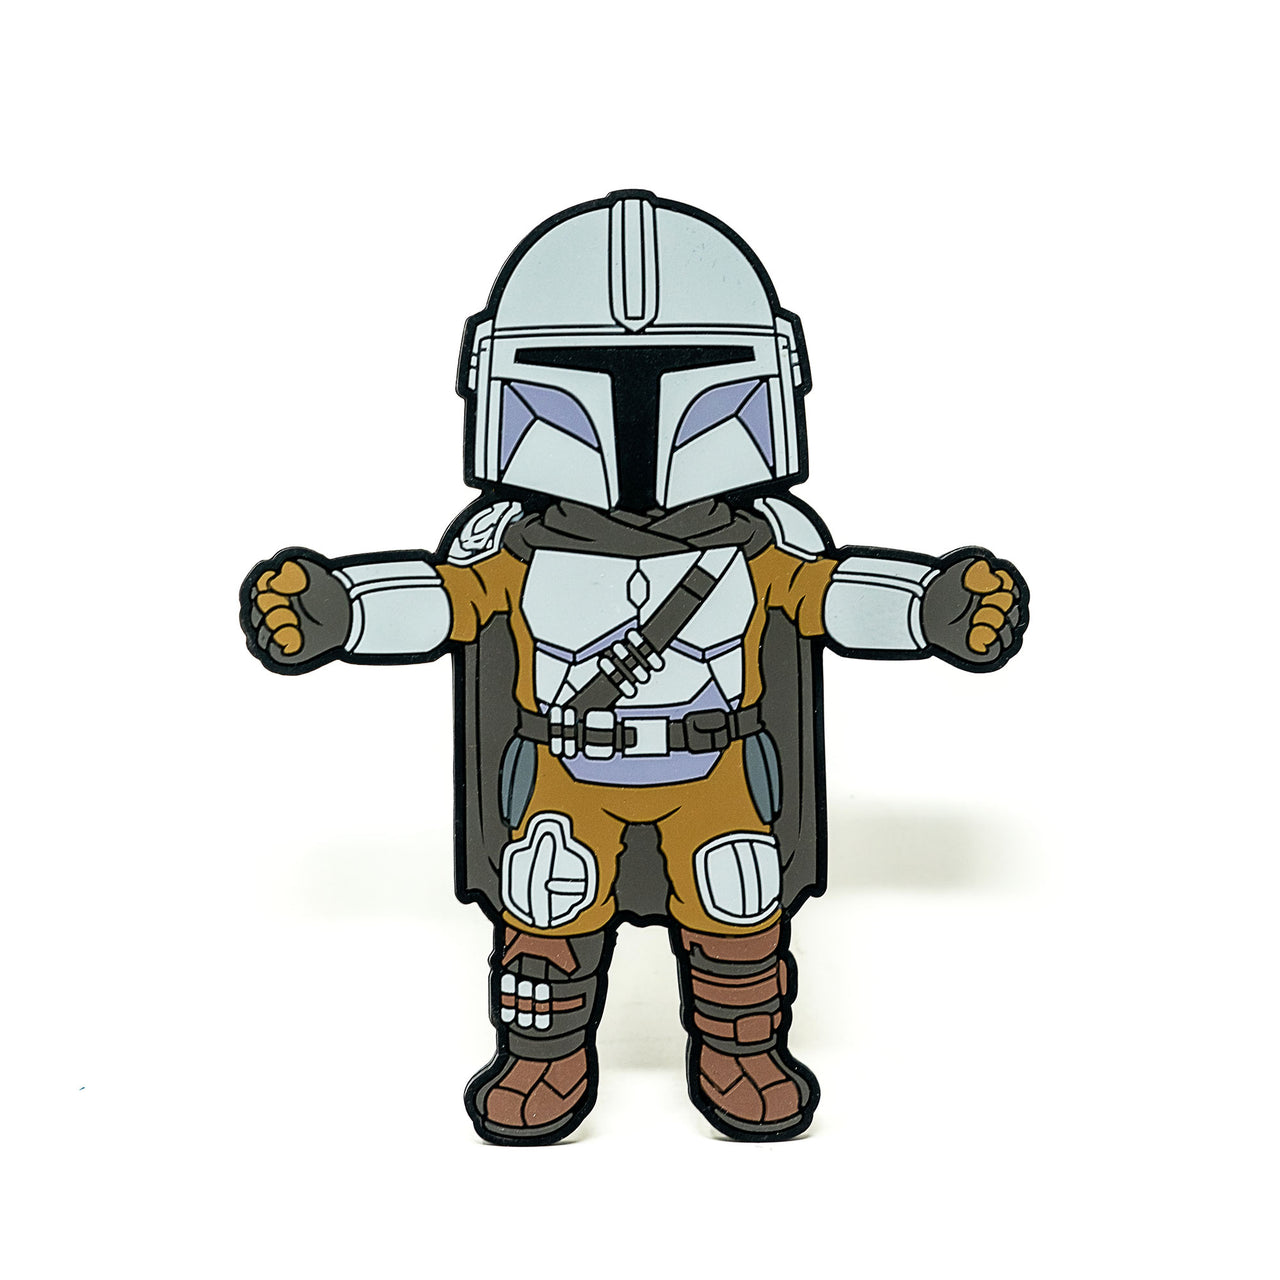 Image of Star Wars The Mandalorian Hug Buddy on a white background, with arms and legs spread open